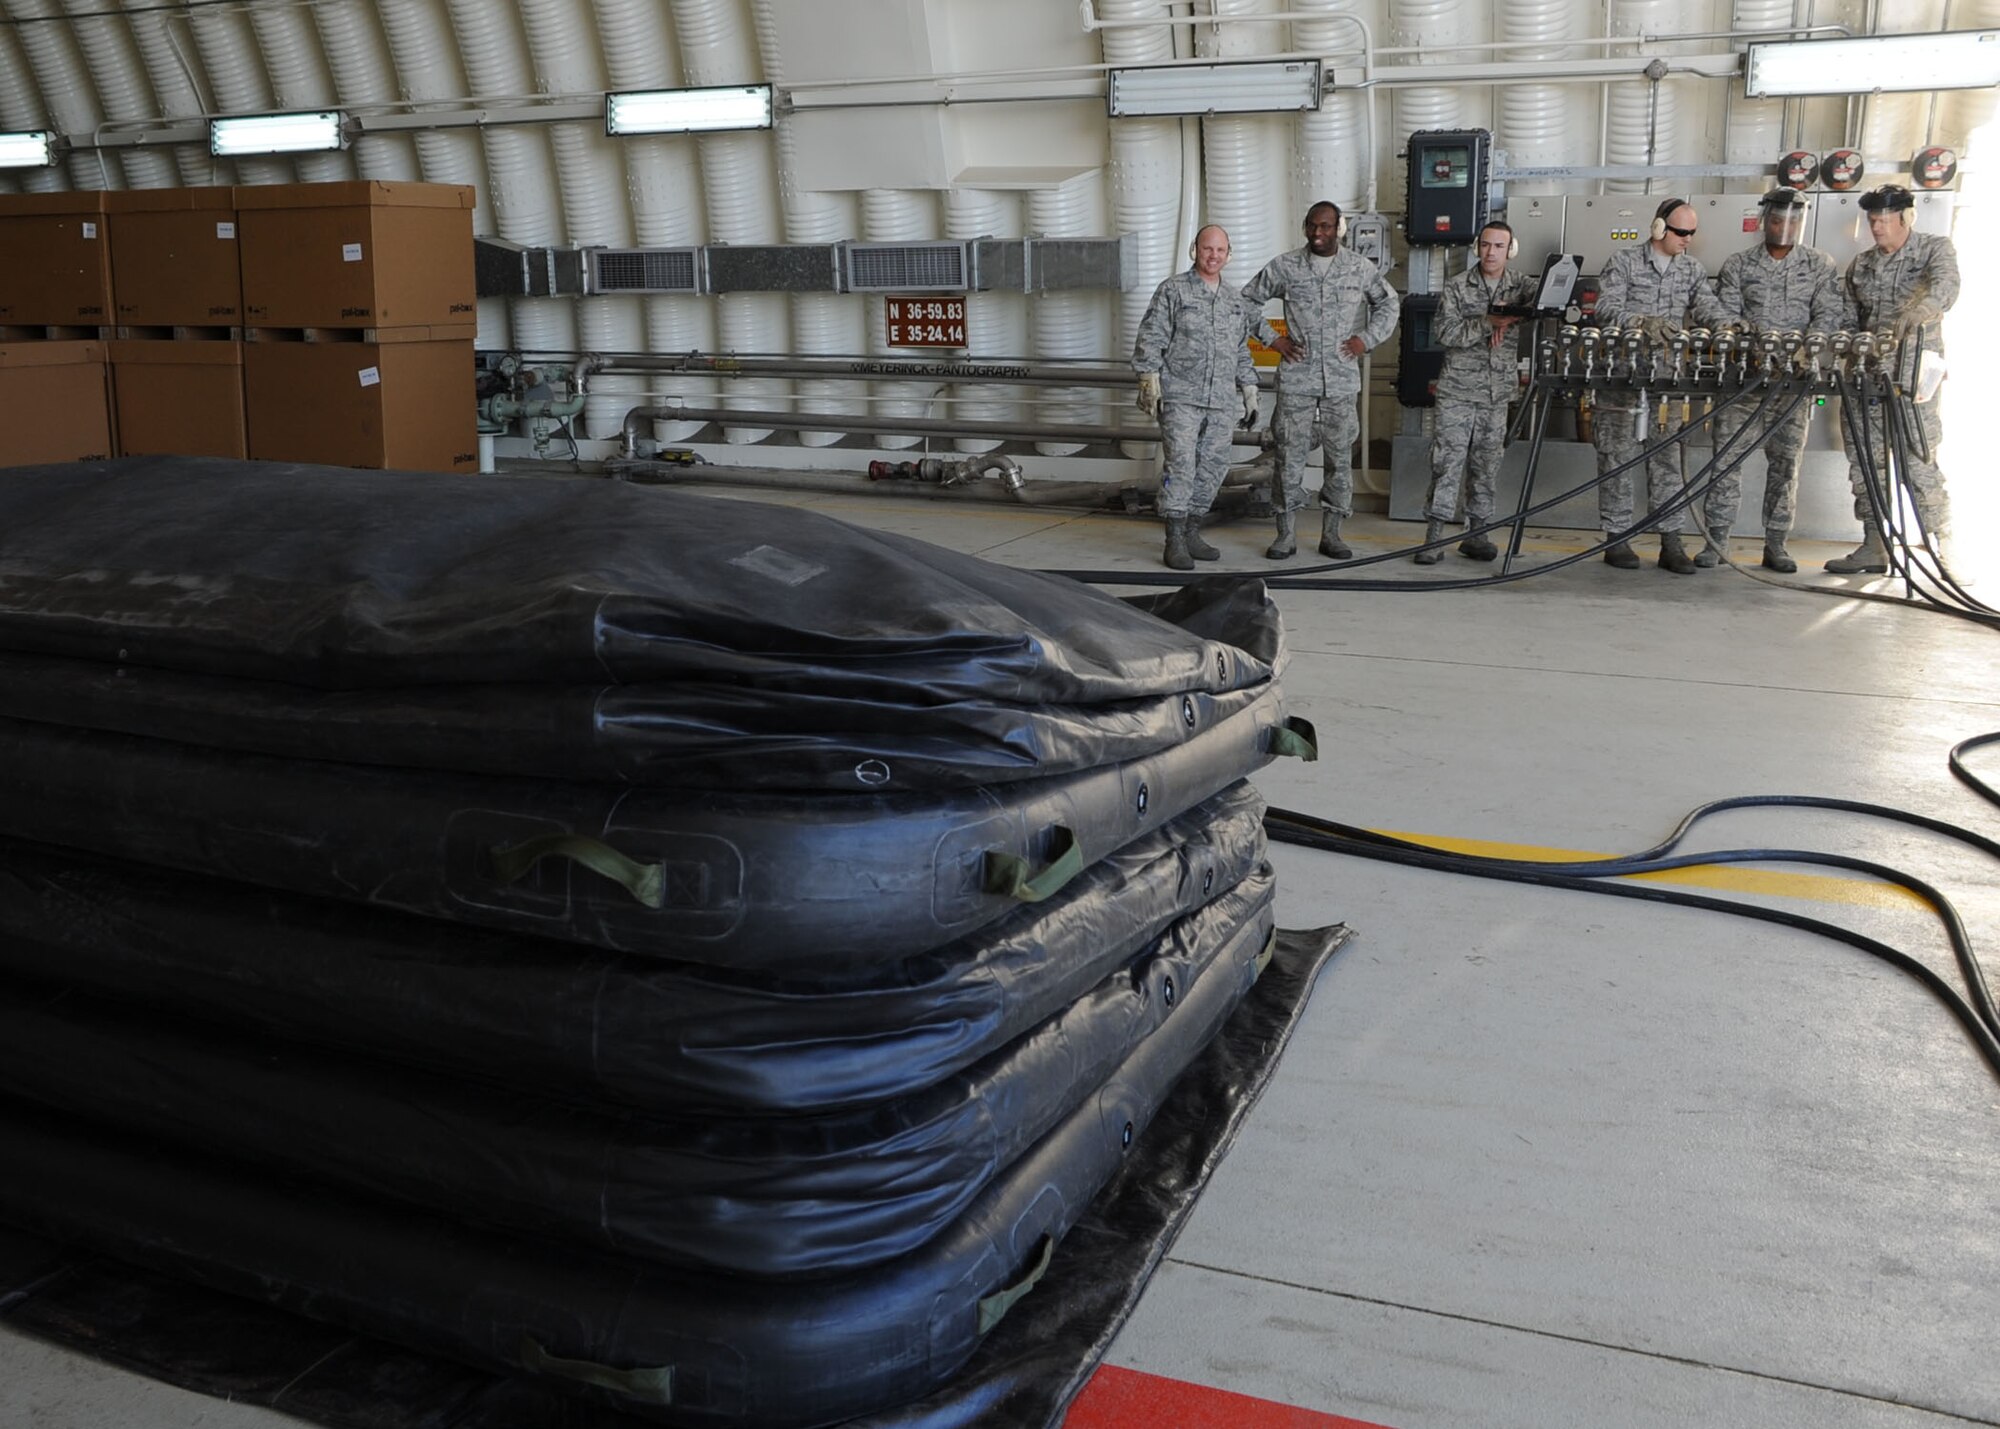 Col. Craig Wills, 39th Air Base Wing commander, and Chief Master Sgt. Anthony Johnson, 39th ABW command chief, along with Airmen from the 39th Maintenance Squadron watch as a pneumatic airbag inflates Jan. 23, 2014, at Incirlik Air Base, Turkey.  The team demonstrated of the squadrons Crash Disabled Damaged Aircraft Recovery capability. The airbag technique is a last resort process, which provides lift capabilities in the event of a damaged aircraft. The CDDAR team maintains the training and knowledge to safely lift a damaged airframe. (U.S. Air Force photo by Staff Sgt. Veronica Pierce/Released)